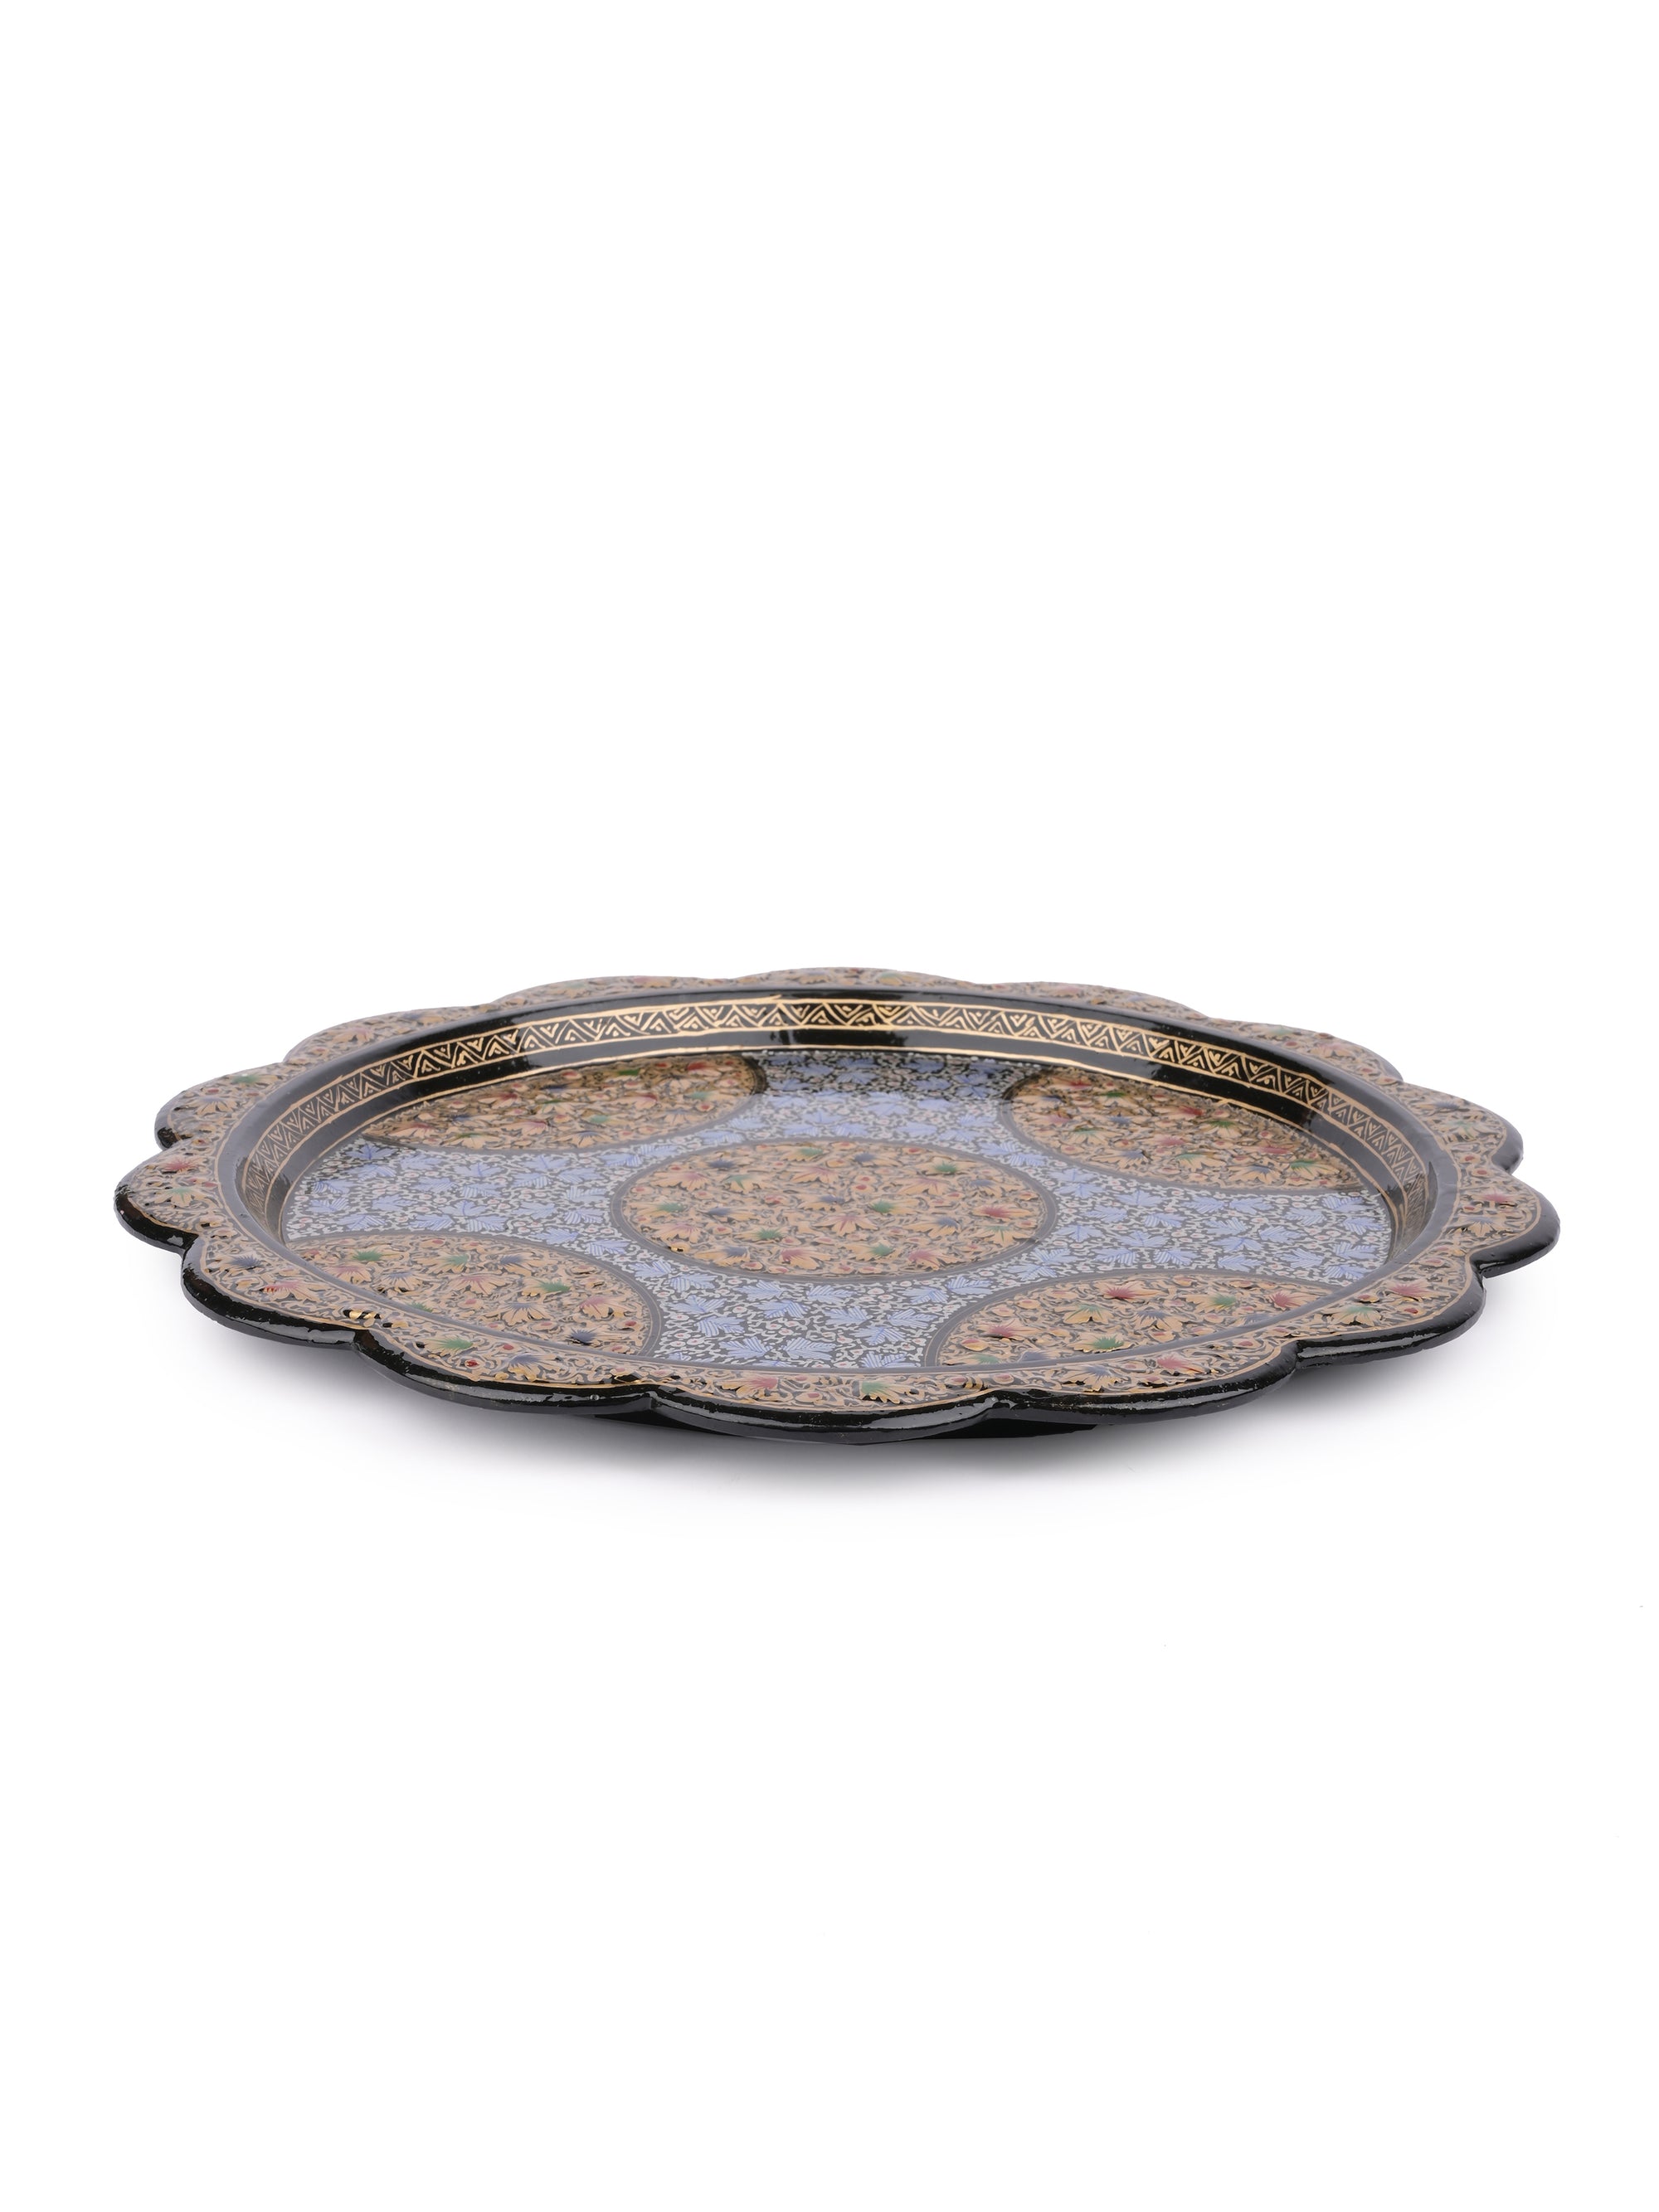 Paper Mache, Colorful Round Decorative Serving Tray without handle - The Heritage Artifacts